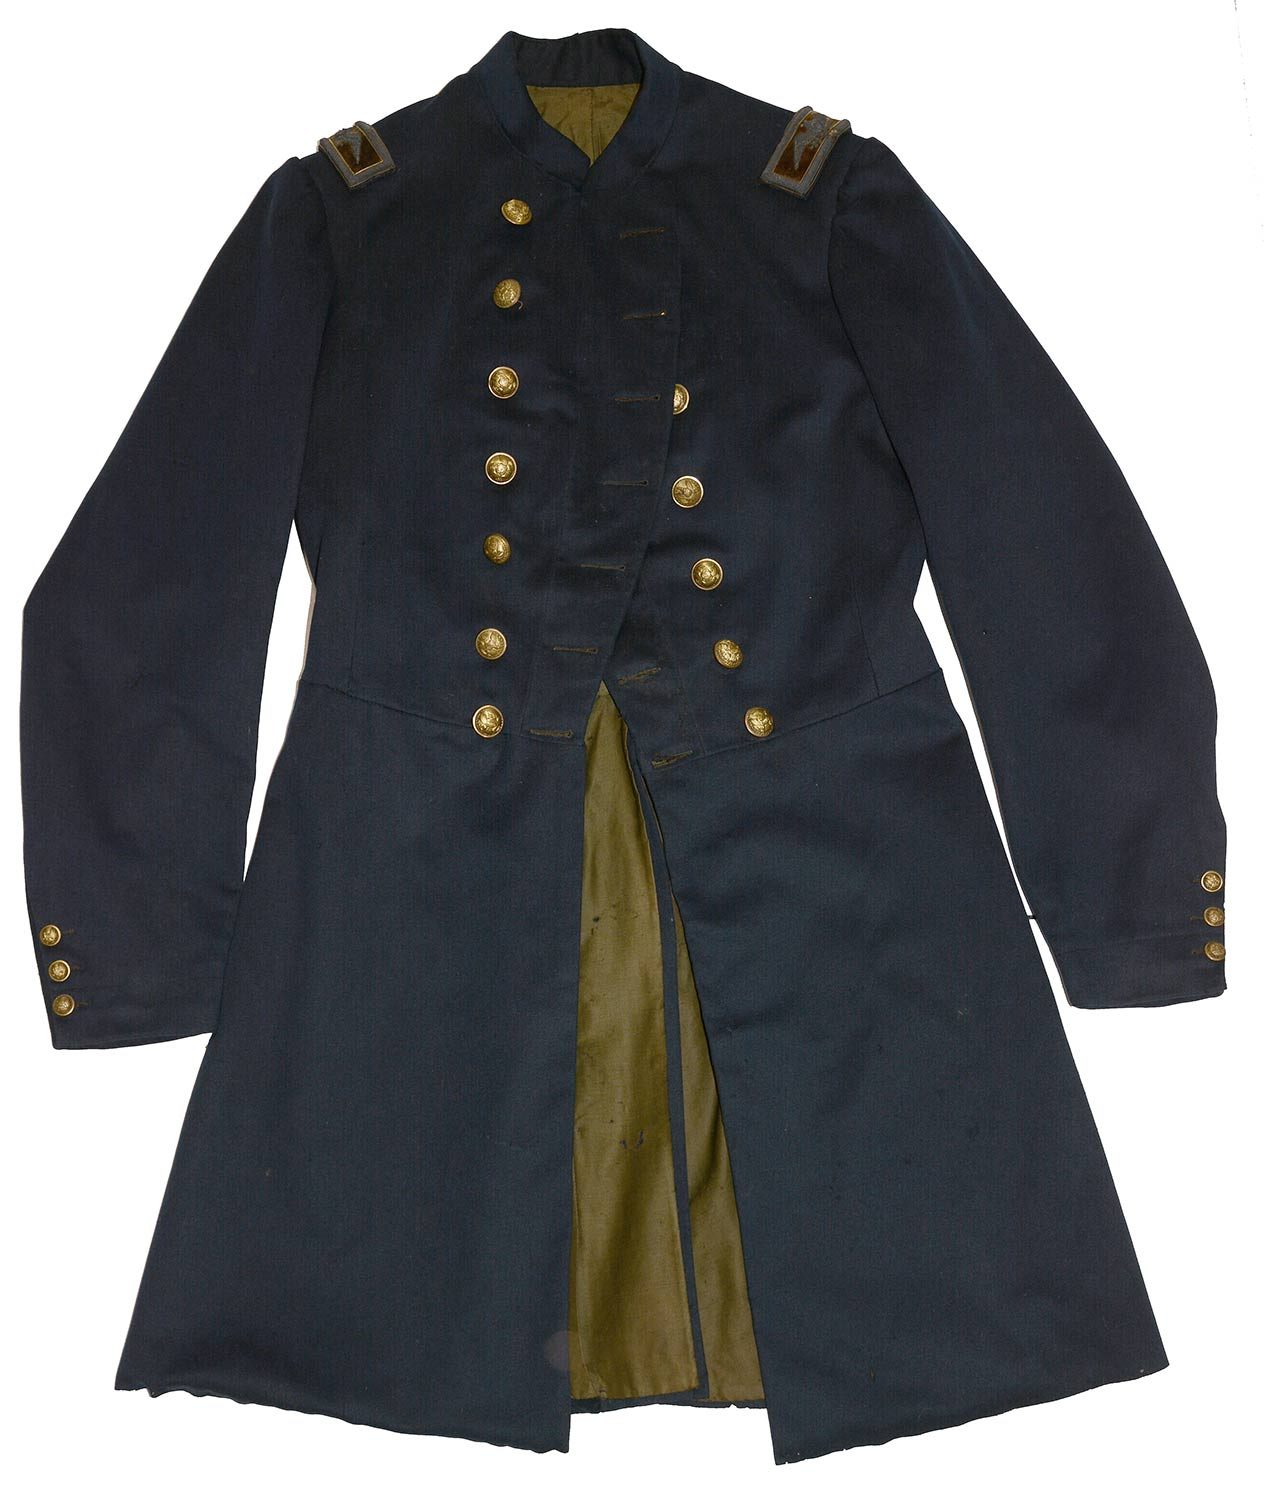 VERY GOOD CONDITION CIVIL WAR REGULATION UNION FULL COLONEL’S FROCK ...